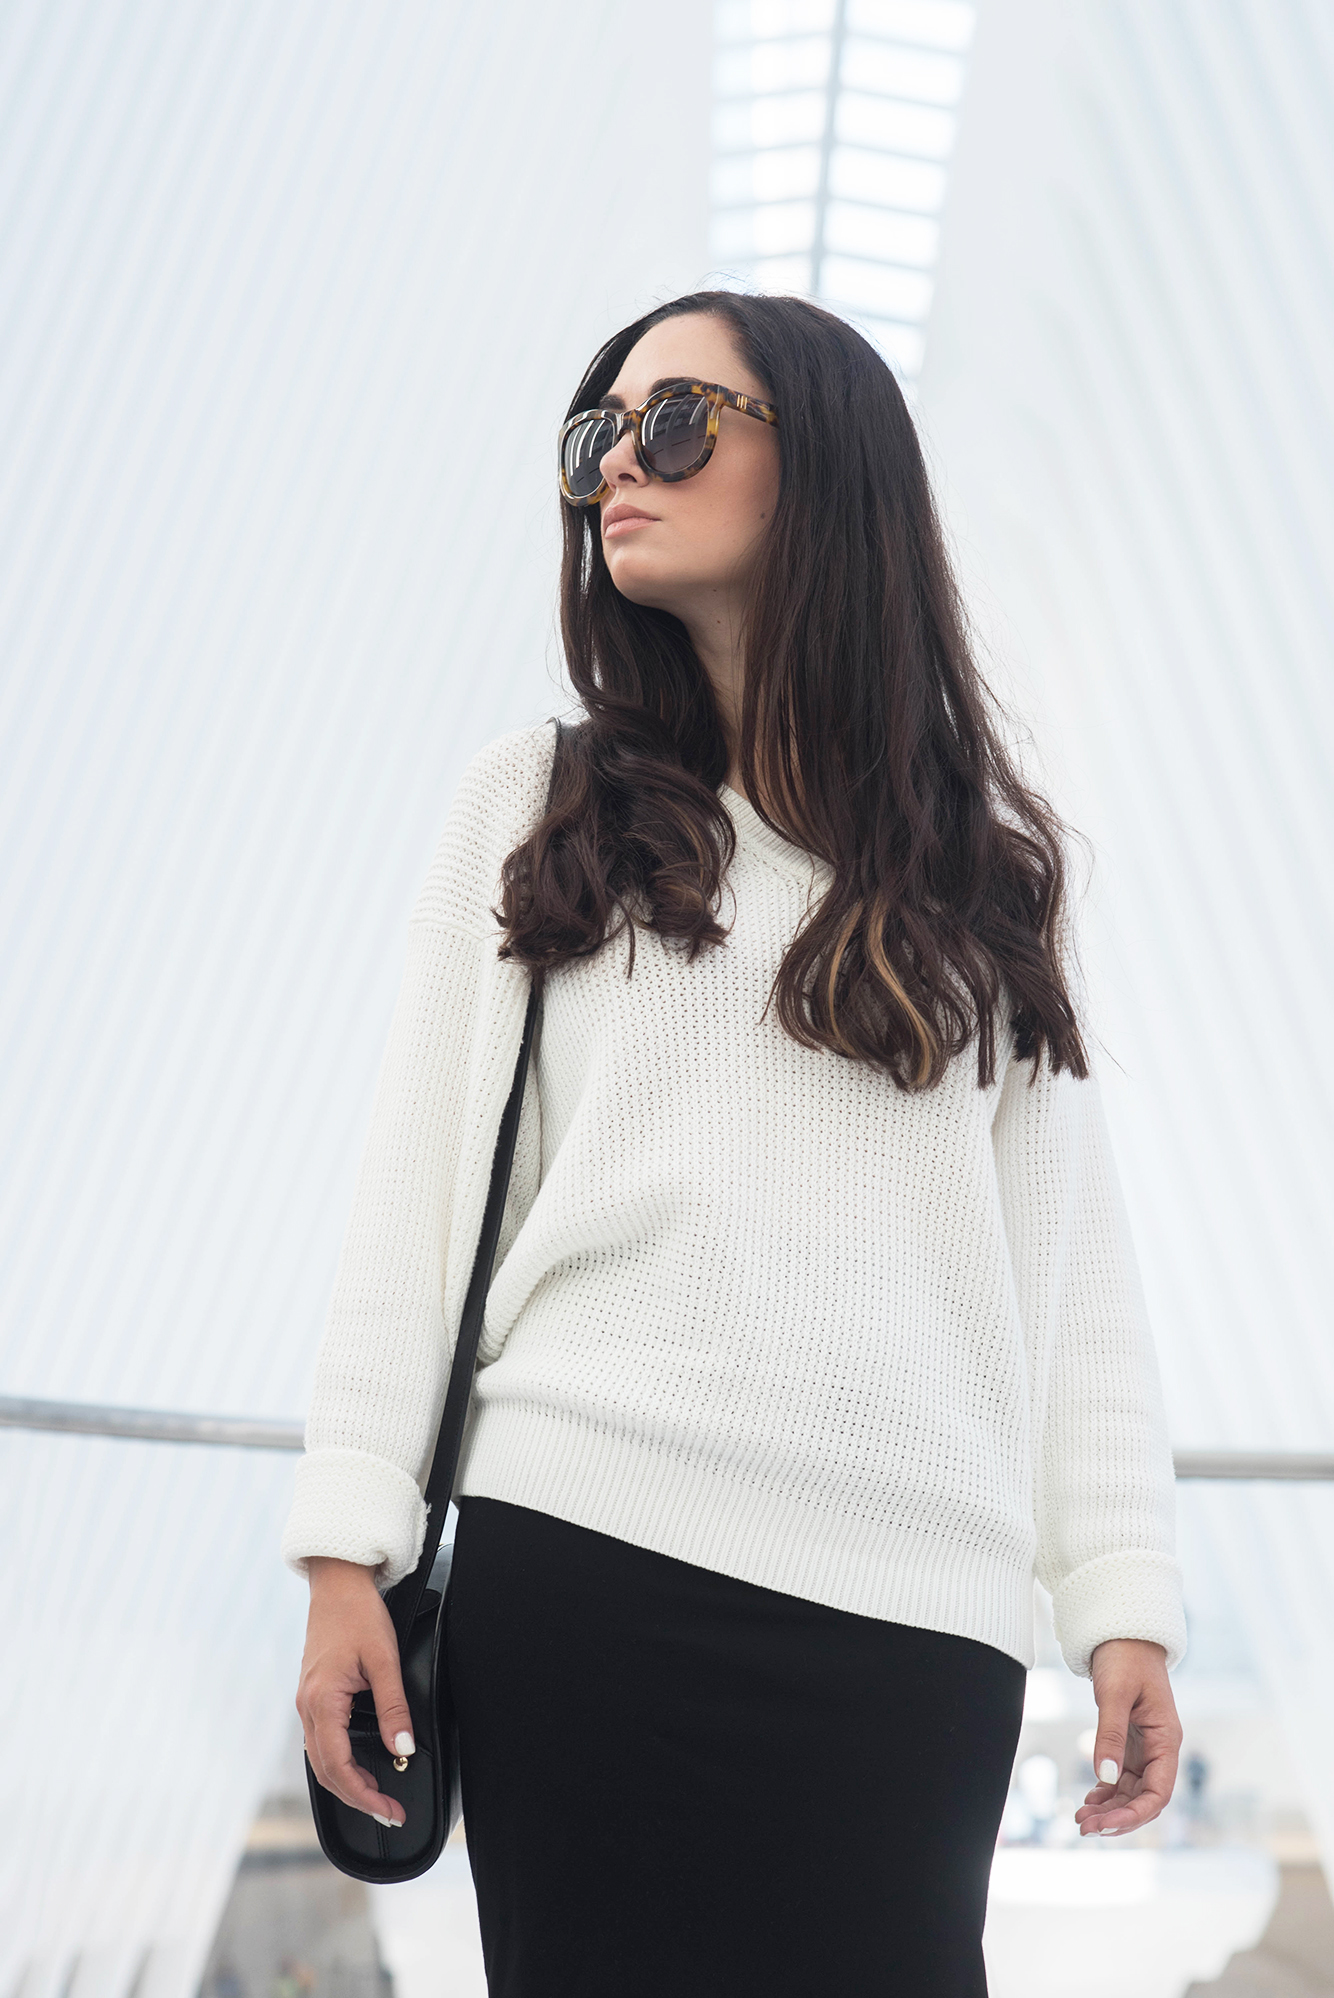 coco-and-vera-top-vancouver-fashion-blog-top-canadian-fashion-blog-top-blogger-nyc-street-style-uniqlo-sweater-le-chateau-skirt-sam-edelman-heels-anine-bing-sunglasses-copy